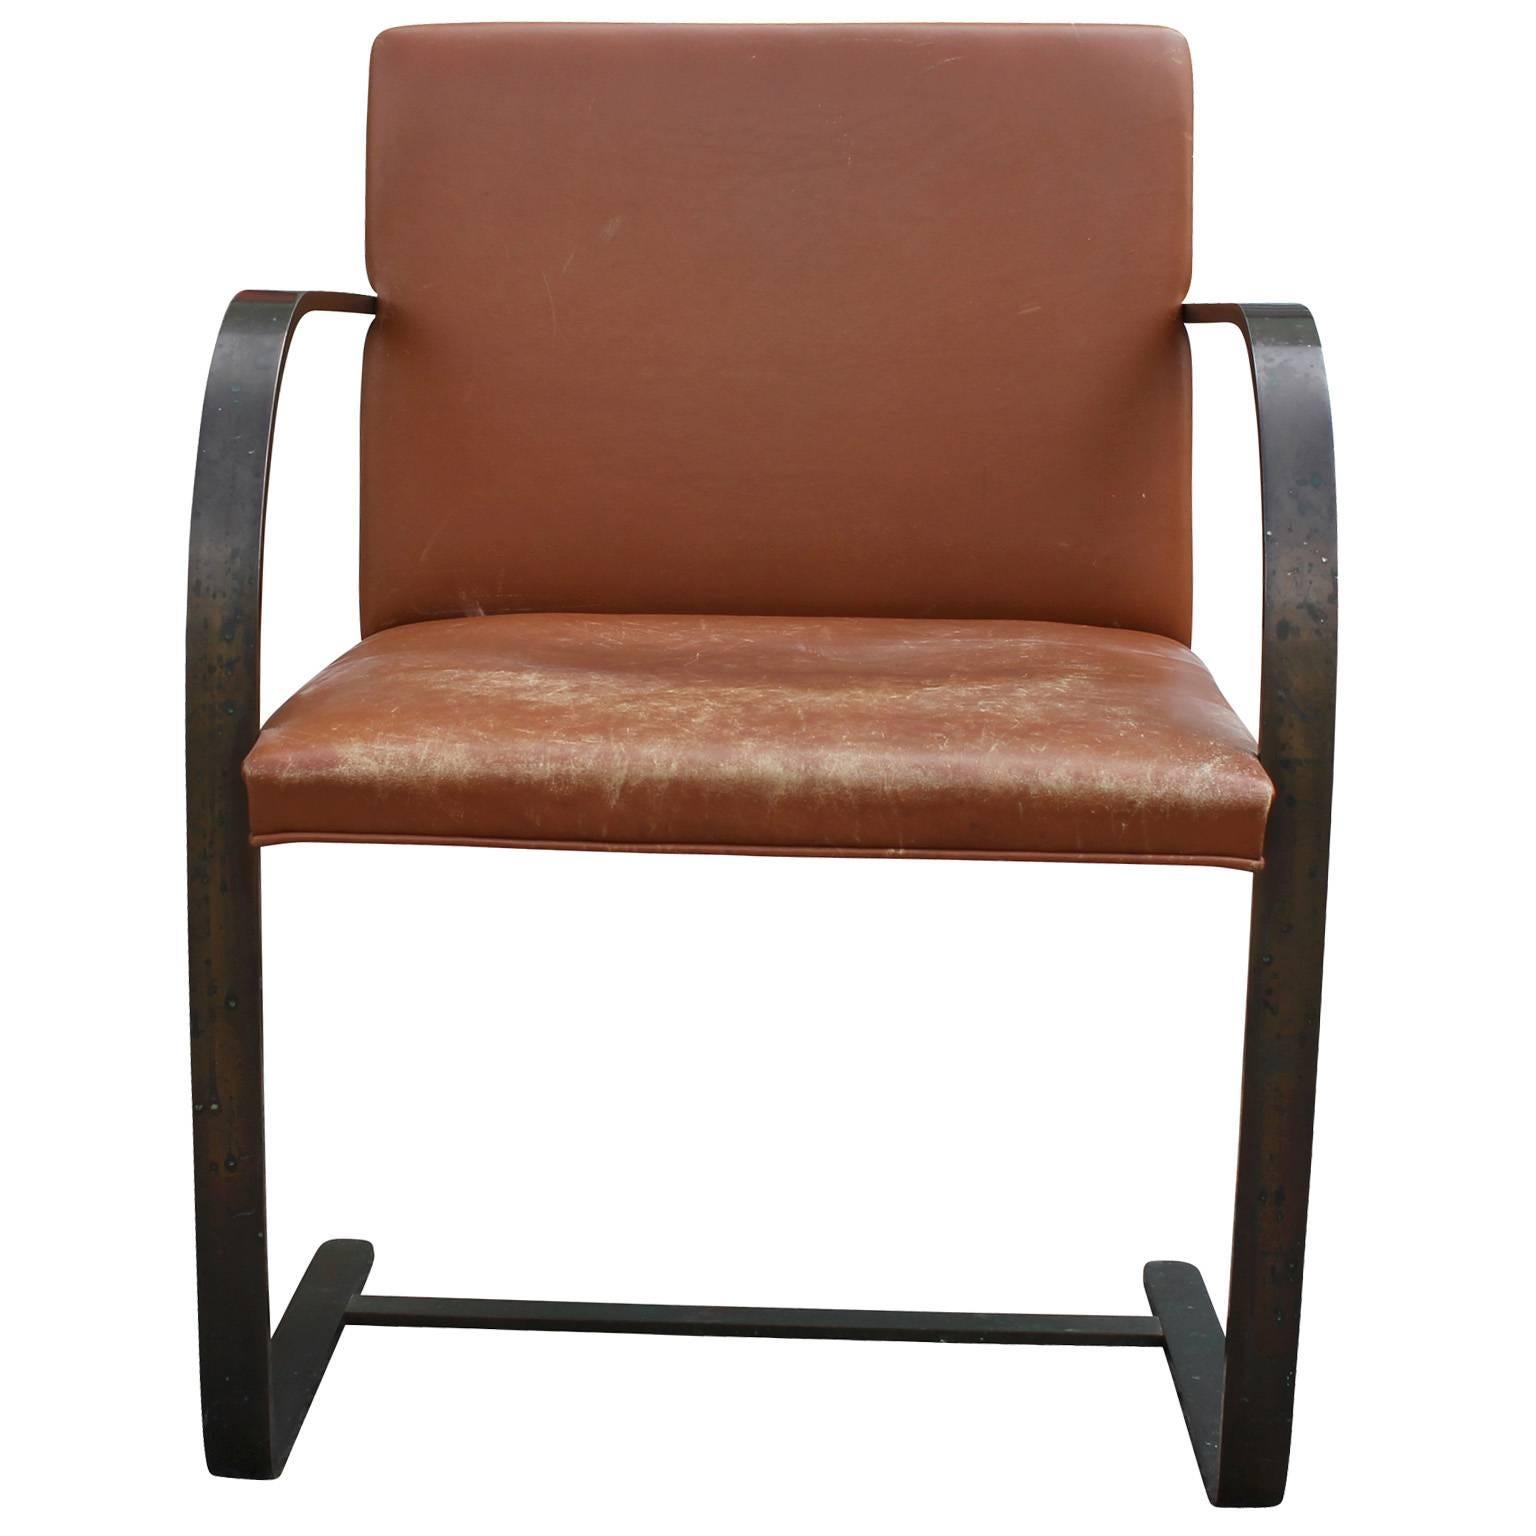 Stunning side chair in by Ludwig Mies van der Rohe Knoll. Chair is upholstered in caramel brown leather with the perfect patina. Cantilevered bronze flat bar base with an excellent patina.